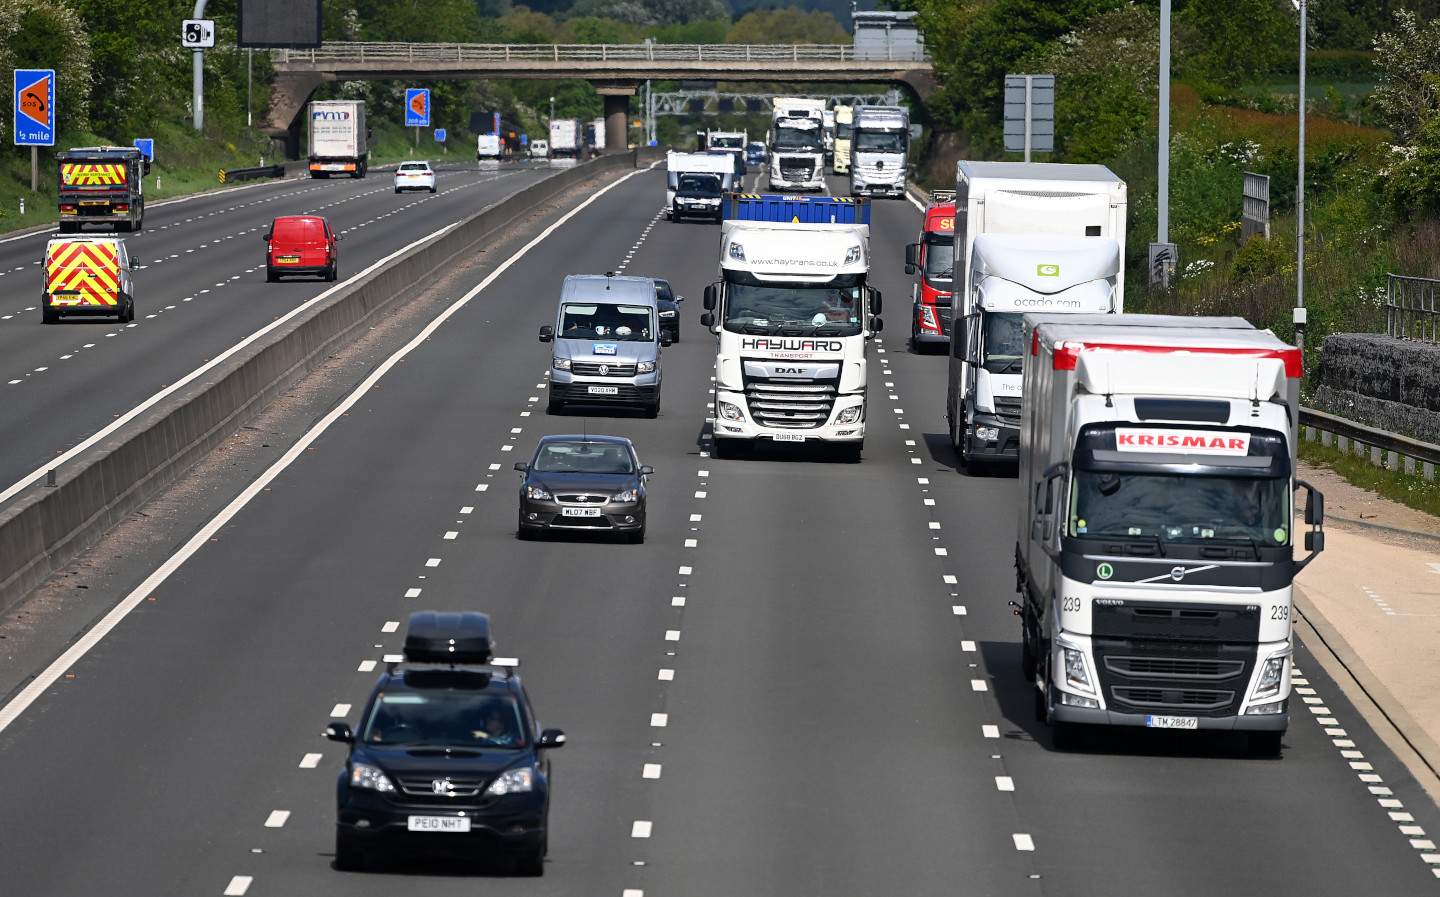 Smart motorway safety tech only installed on 37 miles of network